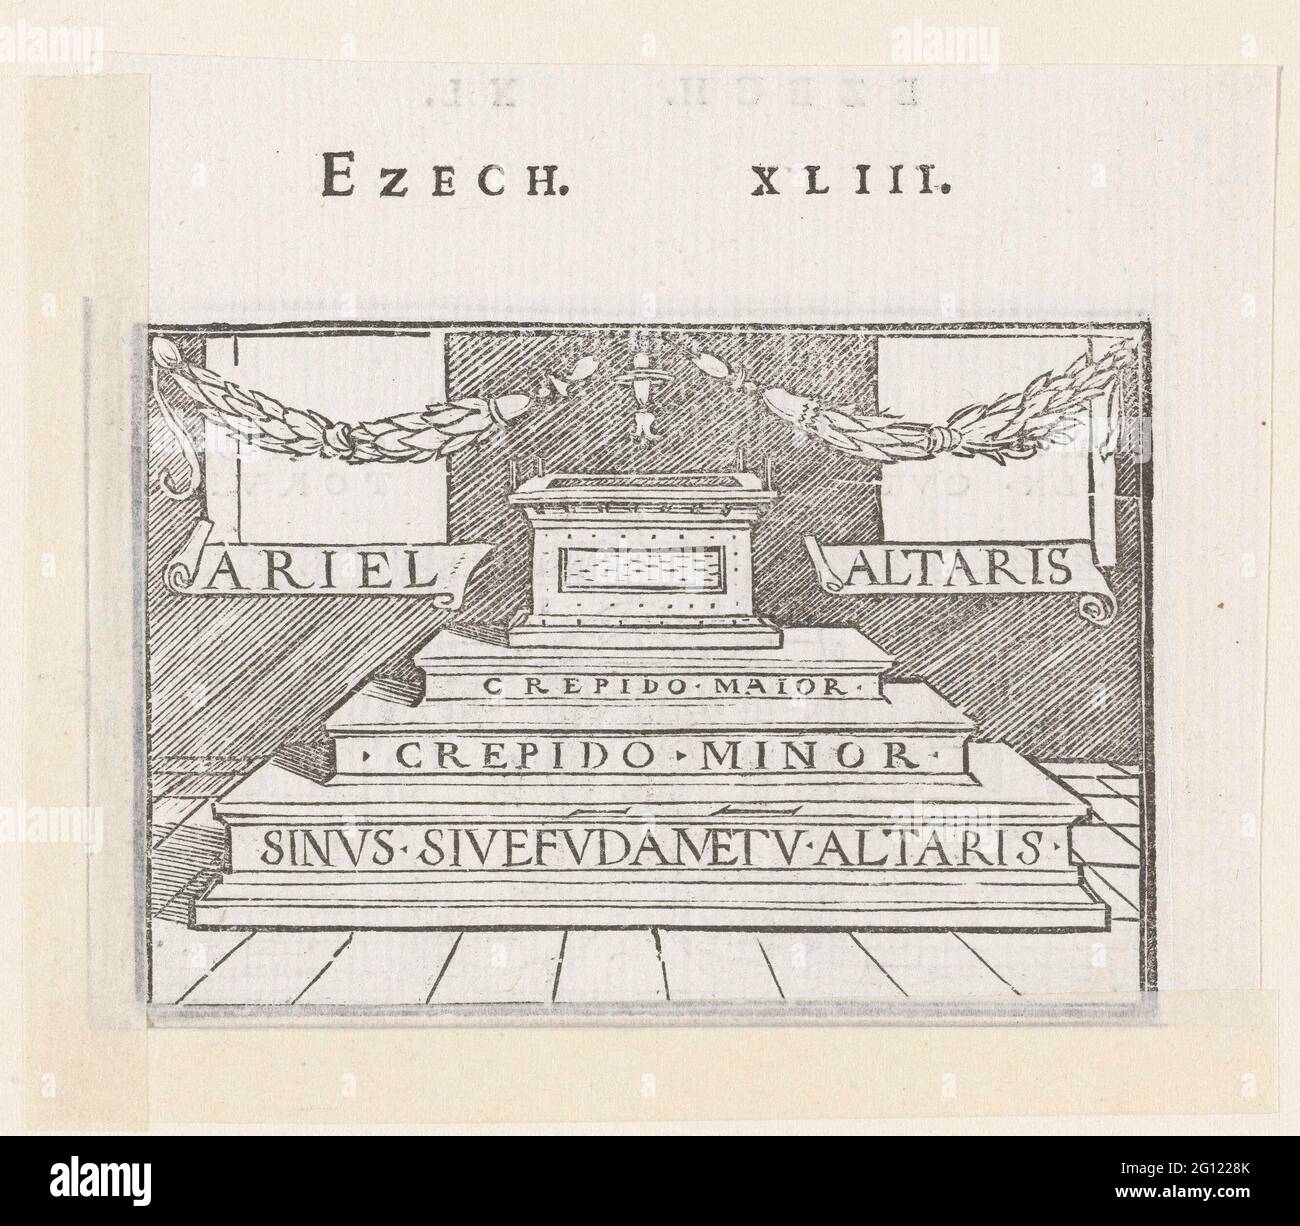 Altar in the new temple in vision of Ezekiel. Altar in the new temple according to the clues of God as Ezekiel gets to see in a vision. Latin text is on the stage of stage to the altar. The text Ezech is in the margin above the image. XLIII. Stock Photo